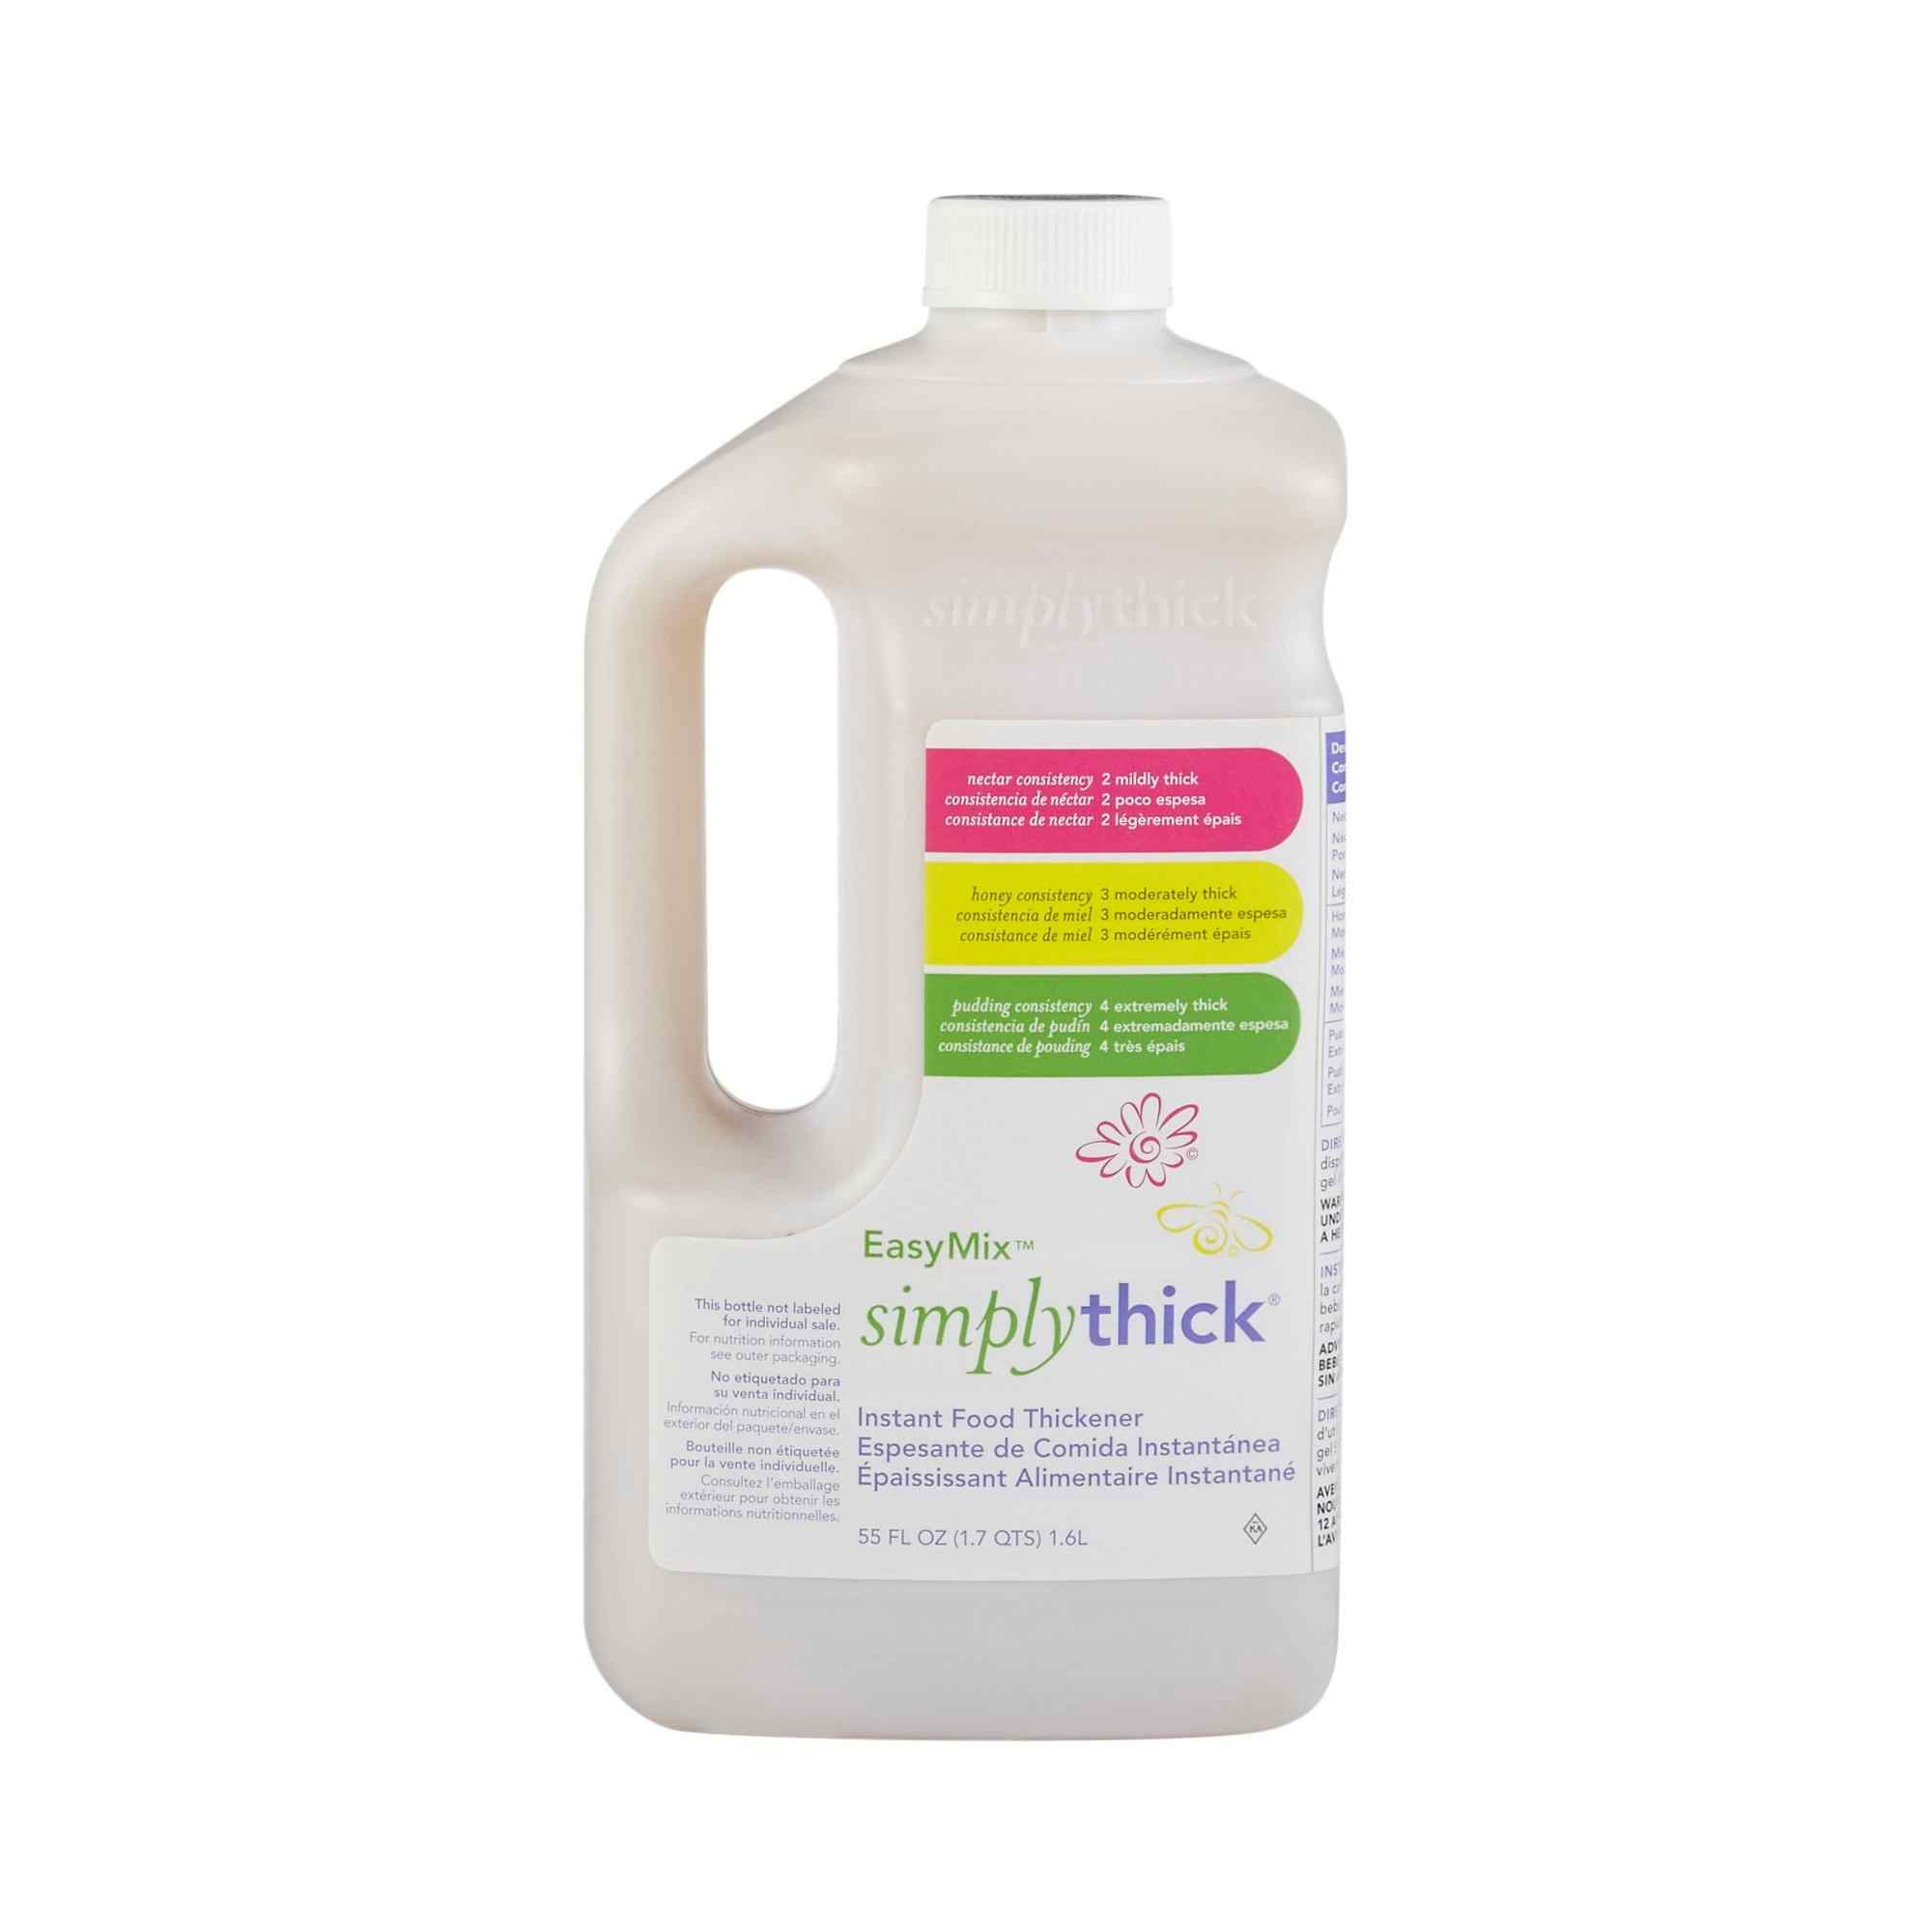 SimplyThick EasyMix Instant Food Thickener, 1.6 Liter